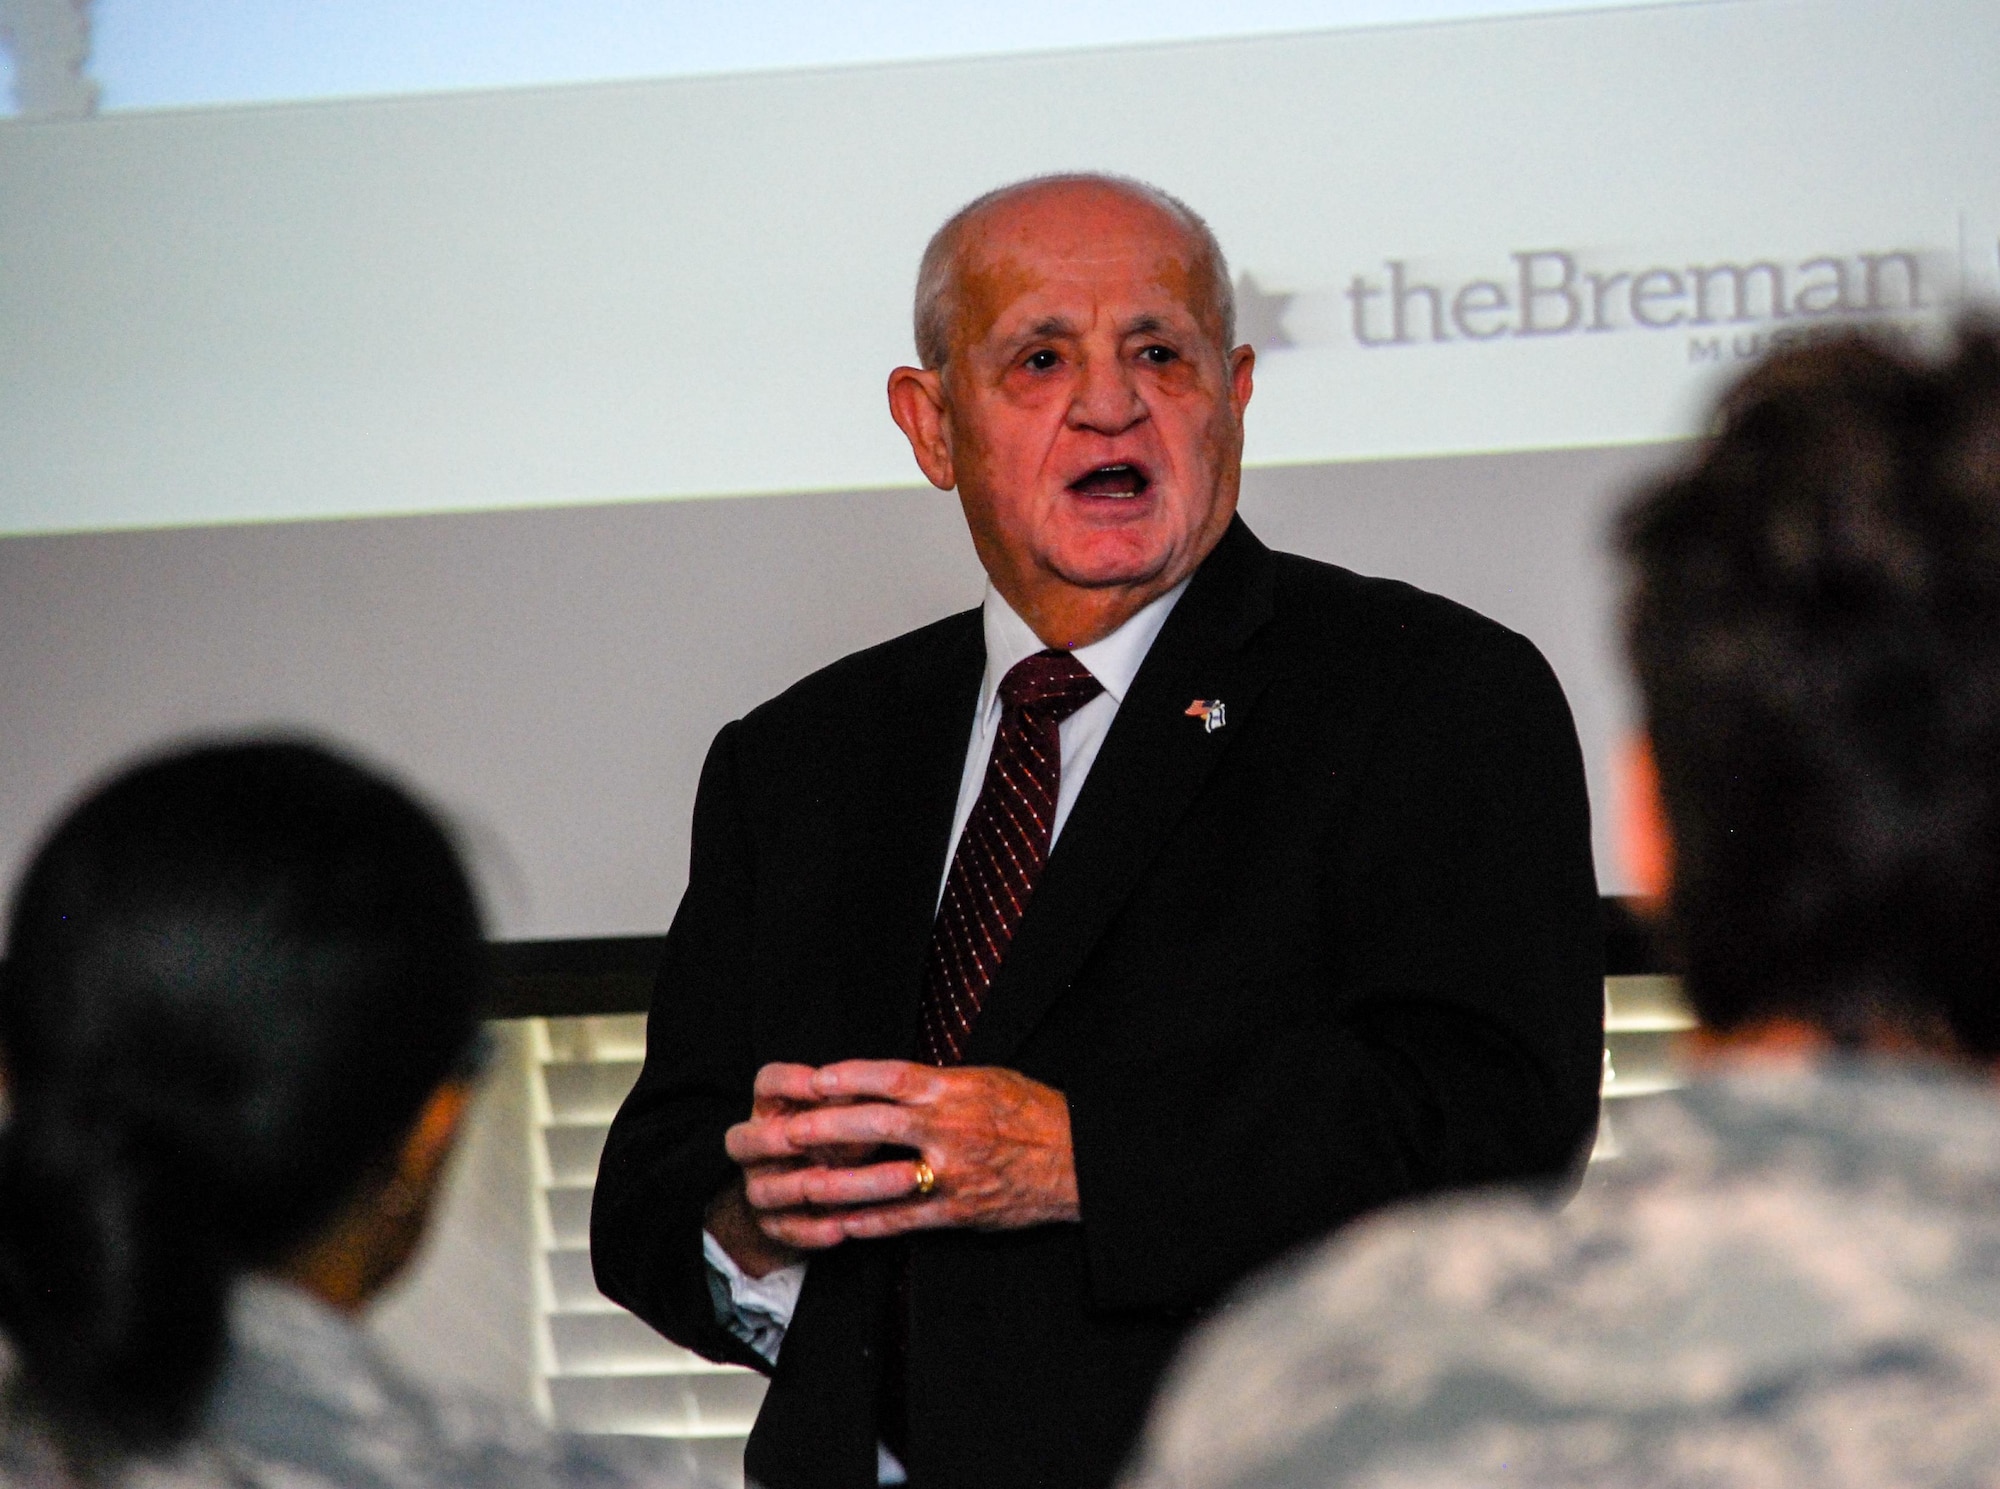 Dobbins Airmen gathered at Verhulst Hall, May 14, 2016, to listen to Hershel Greenblat speak about his Holocaust survival during World War II. (U.S. Air Force photo/Tech. Sgt. Kelly Goonan)